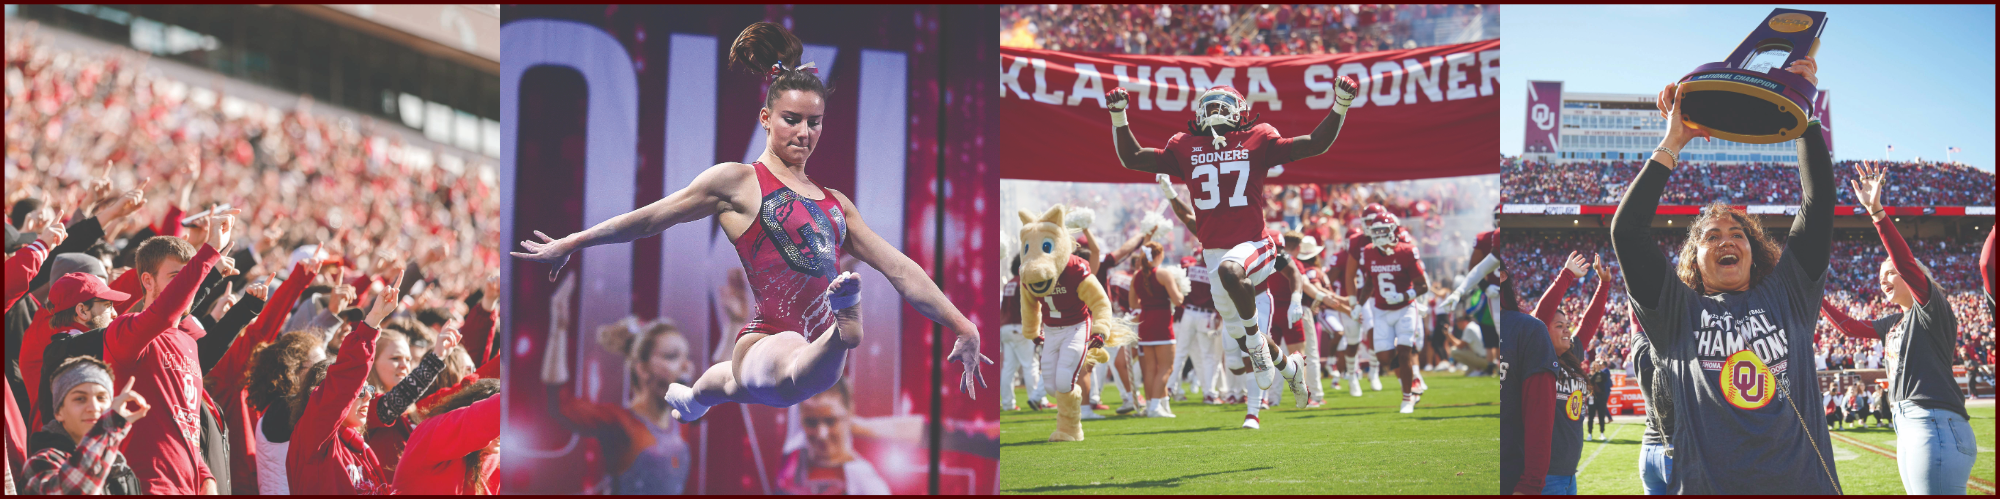 A photo collage of the four following pictures: OU students holding their pointer fingers during a game, an OU gymnast leaping, the OU Football team running on the field with a banner above them, and a softball player holding up her National Championship trophy in front of the football stadium crowd.